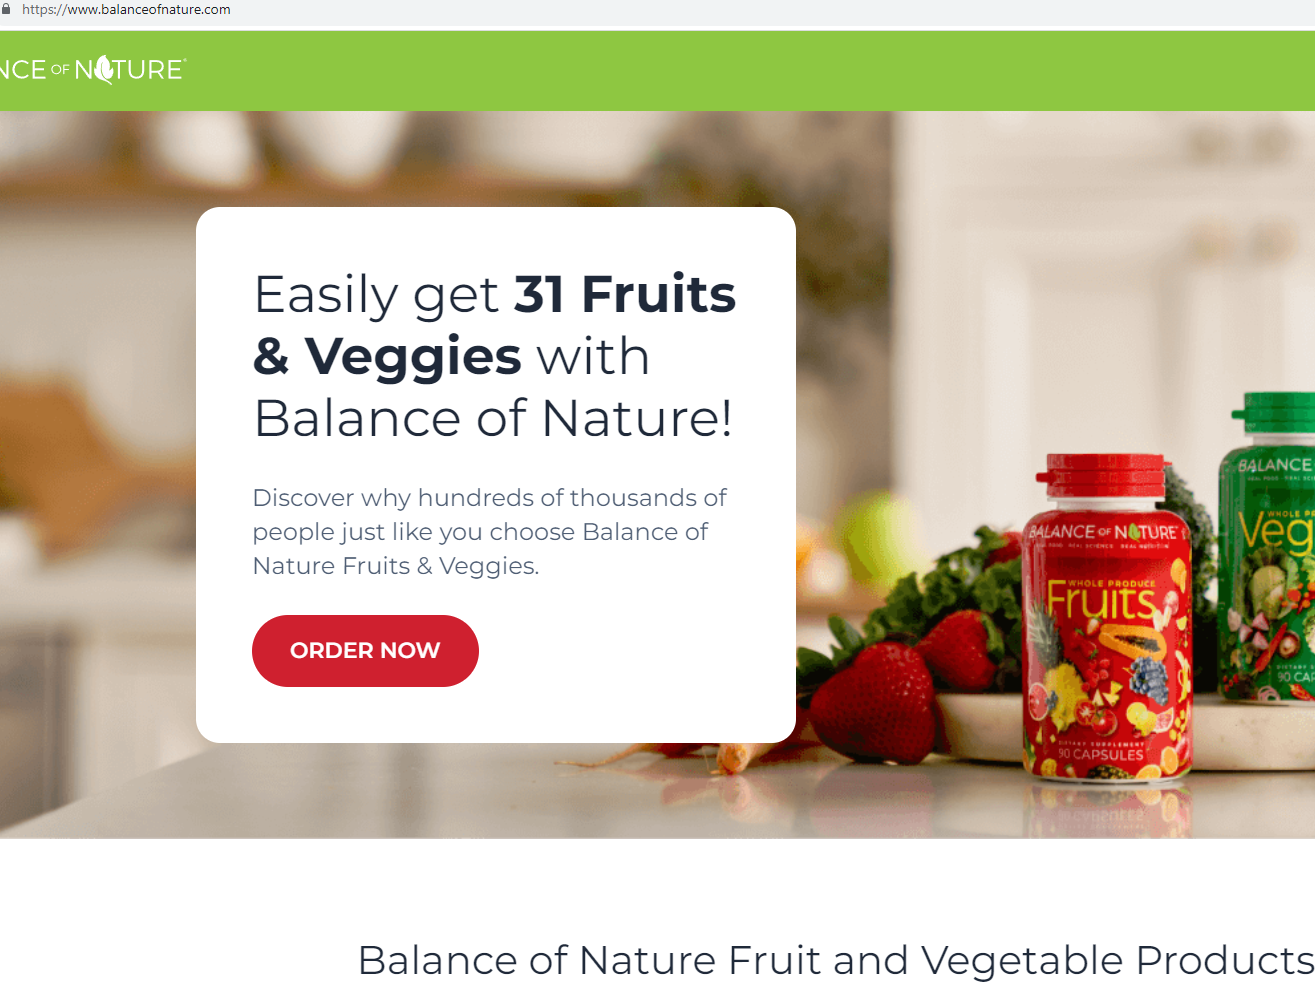 Court Orders 'Balance of Nature' Products To Cease Sales Due To Fraud